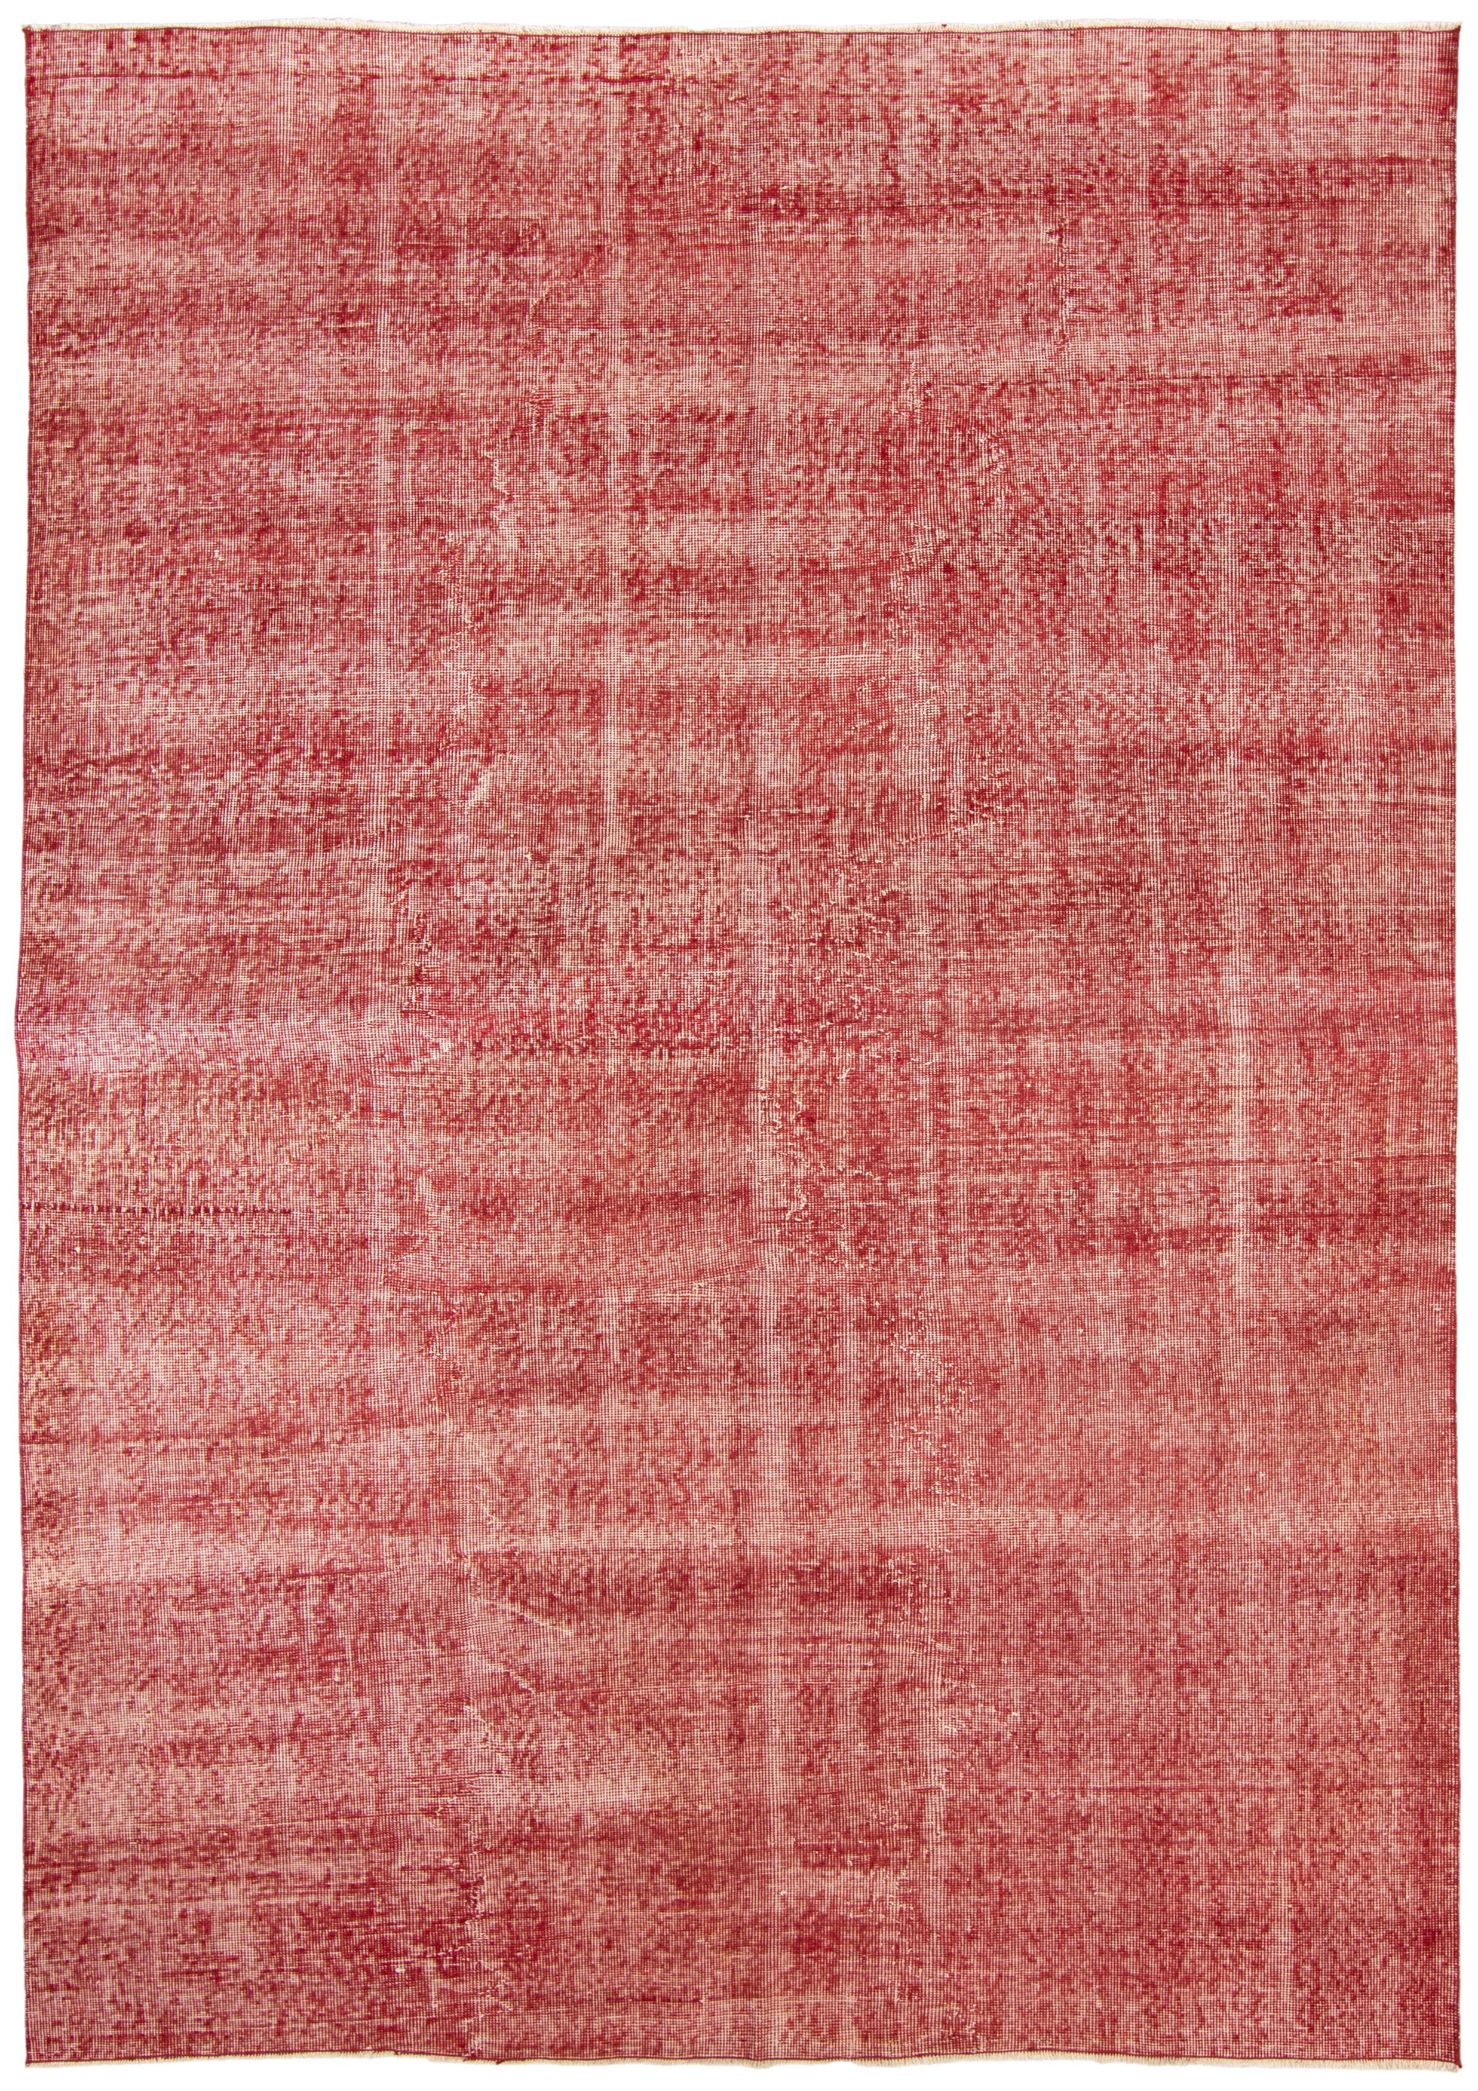 Hand-knotted Color Transition Rug 9'5" x 6'7" Size: 6'7" x 9'5"  